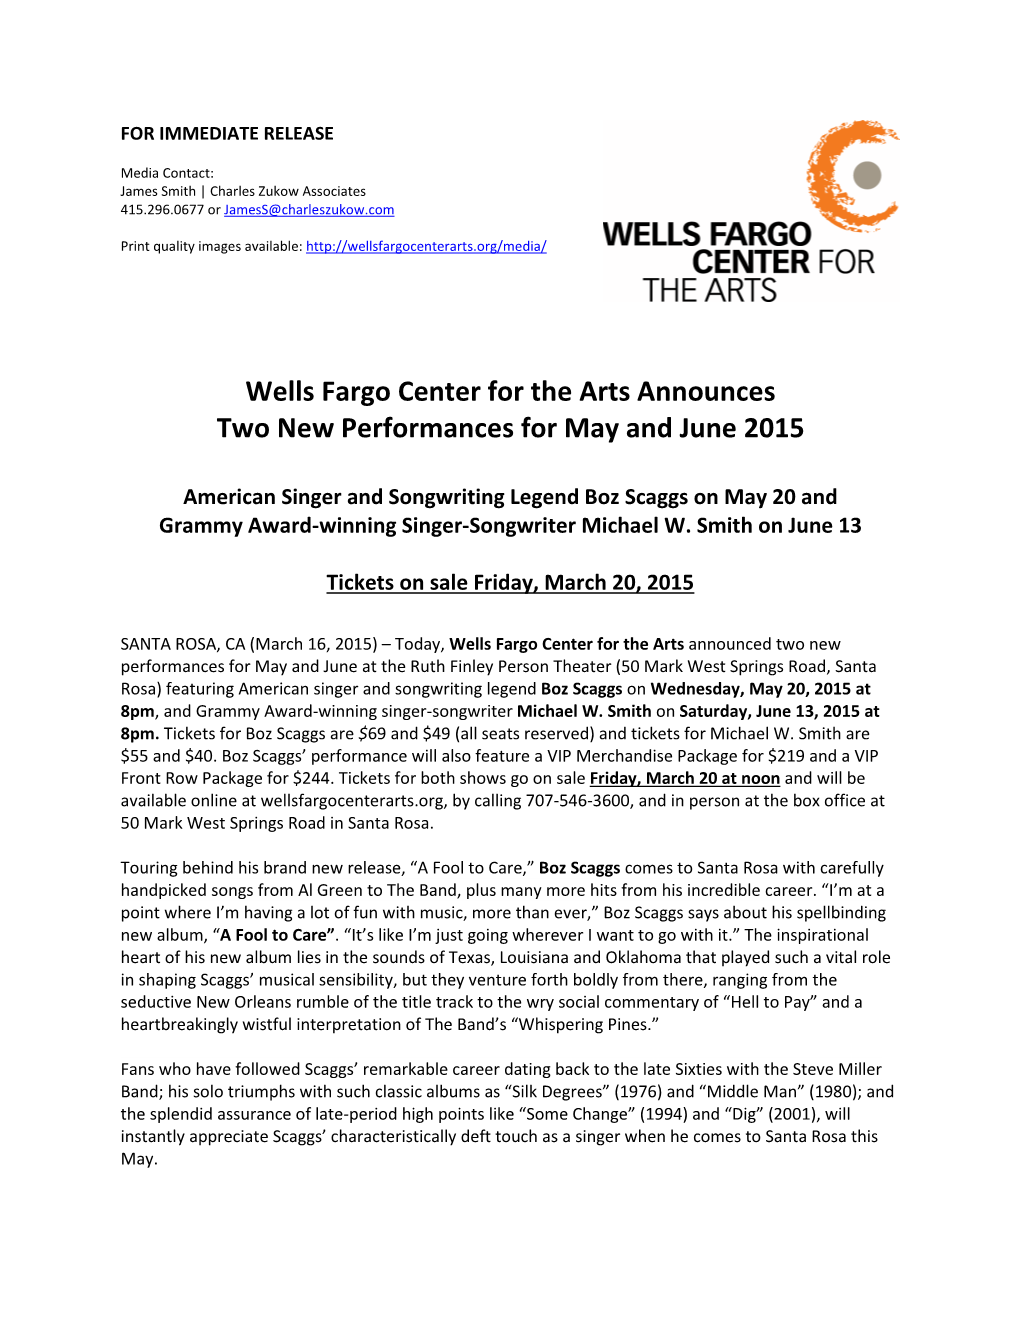 Wells Fargo Center for the Arts Announces Two New Performances for May and June 2015